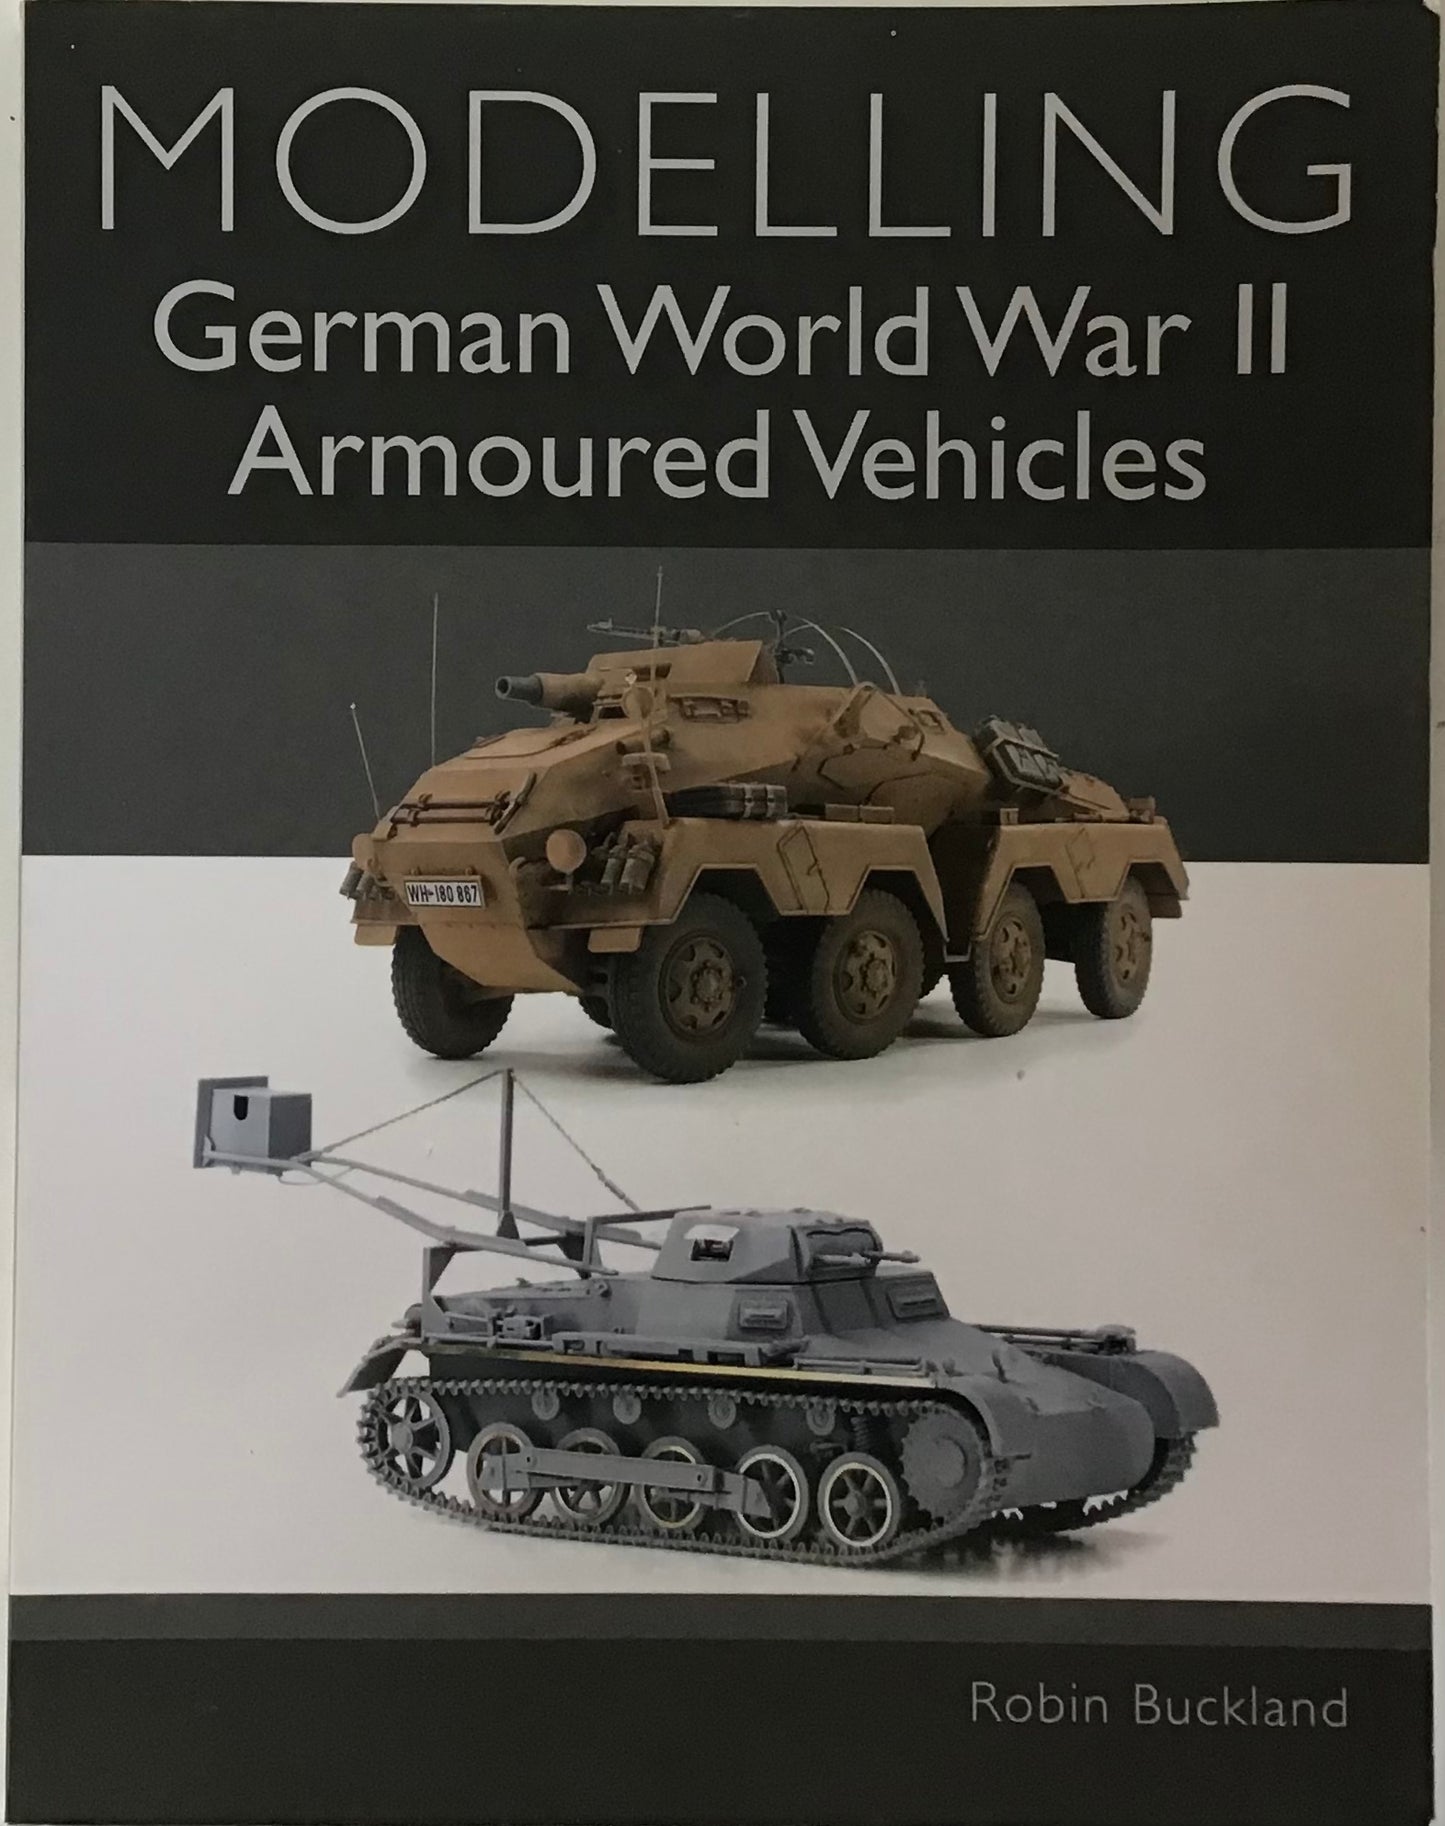 Modelling German World War II Armoured Vehicles by Robin Buckland - Chester Model Centre